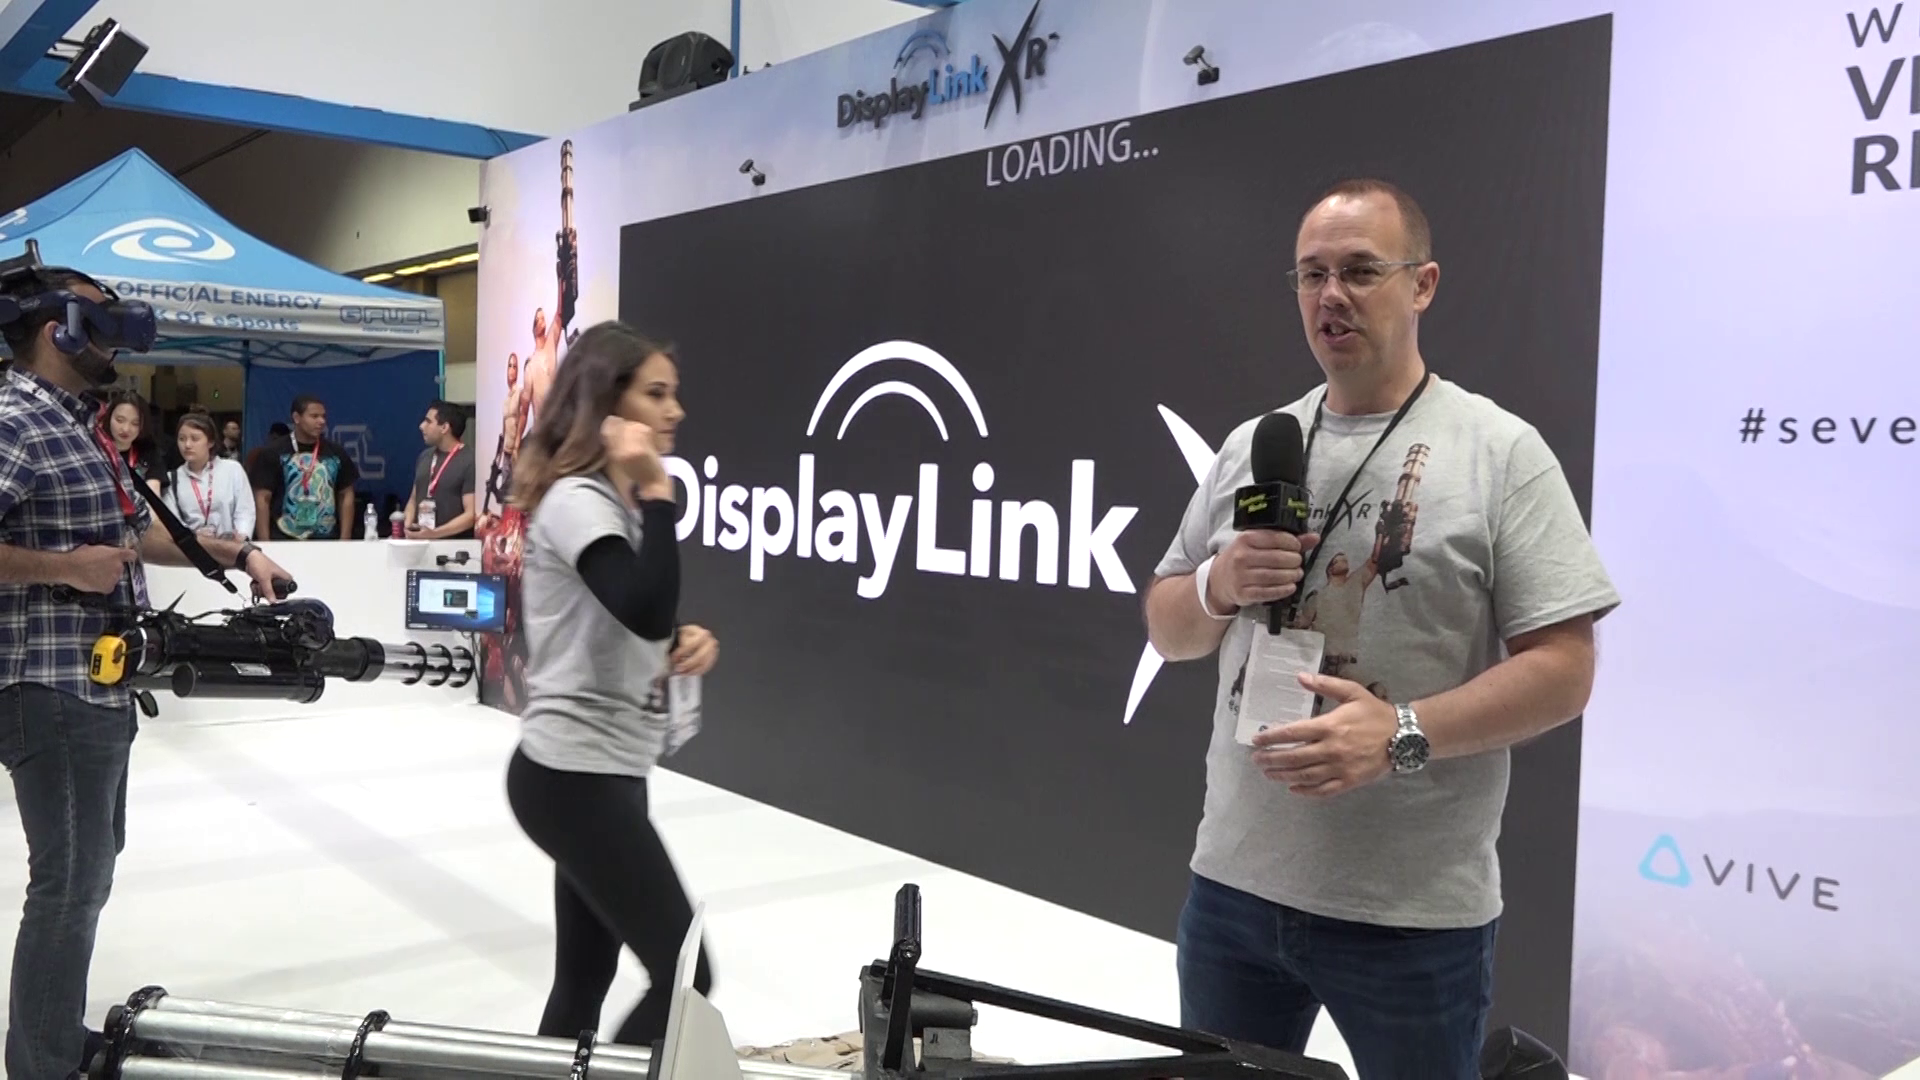 VR for gaming from Display Link at E3